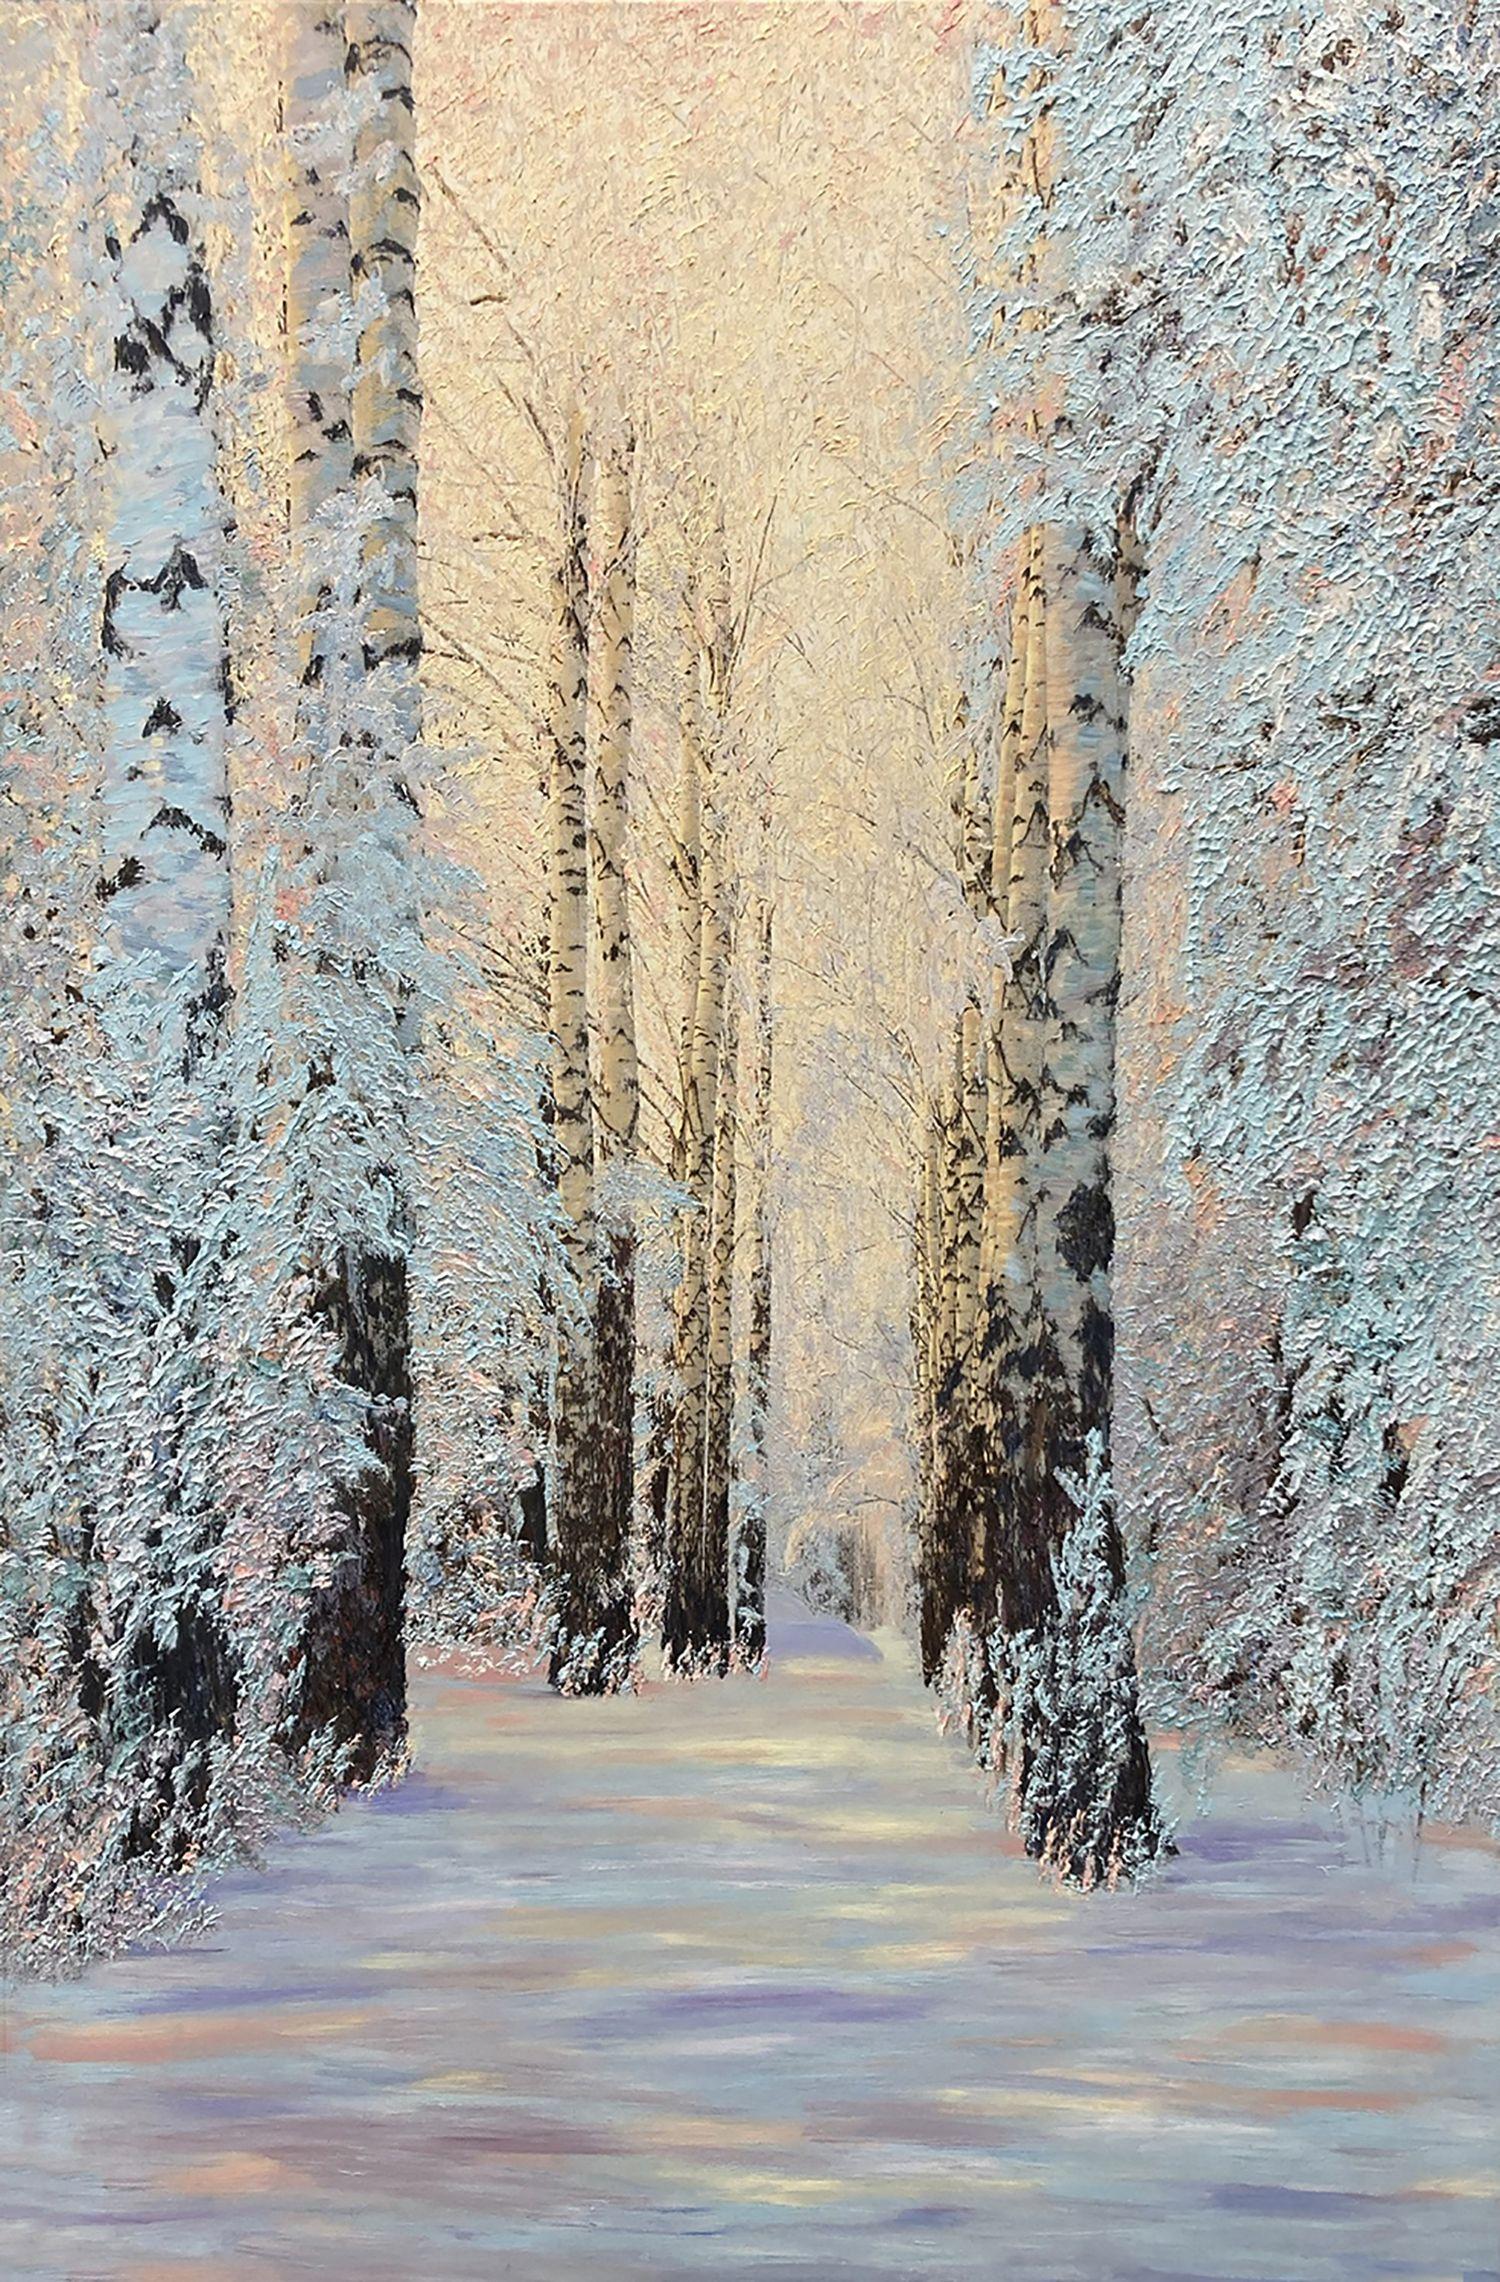 A forest in winter with the trees blanketed in snow creates a thrillingly fresh but very still and calm emotion.    The painting is executed in Clear Impressionism style in thick oils with bright colors, fluid motion, and engaging texture. Canvas is